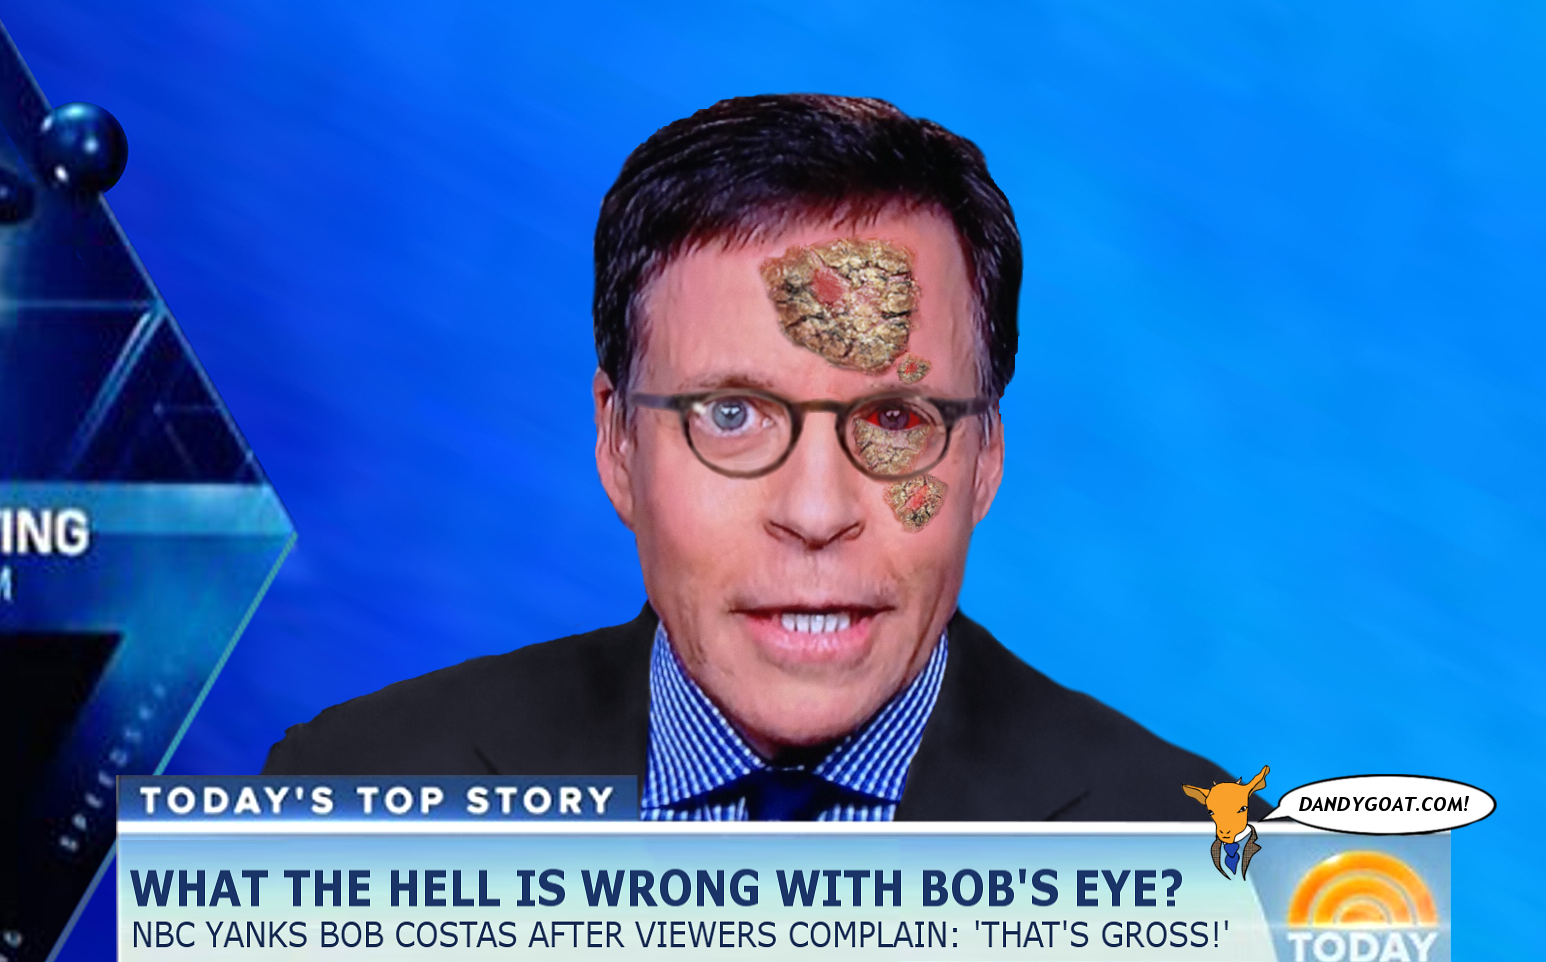 Bob Costas’ mysterious eye infection disgusts NBC viewers - Dandy Goat